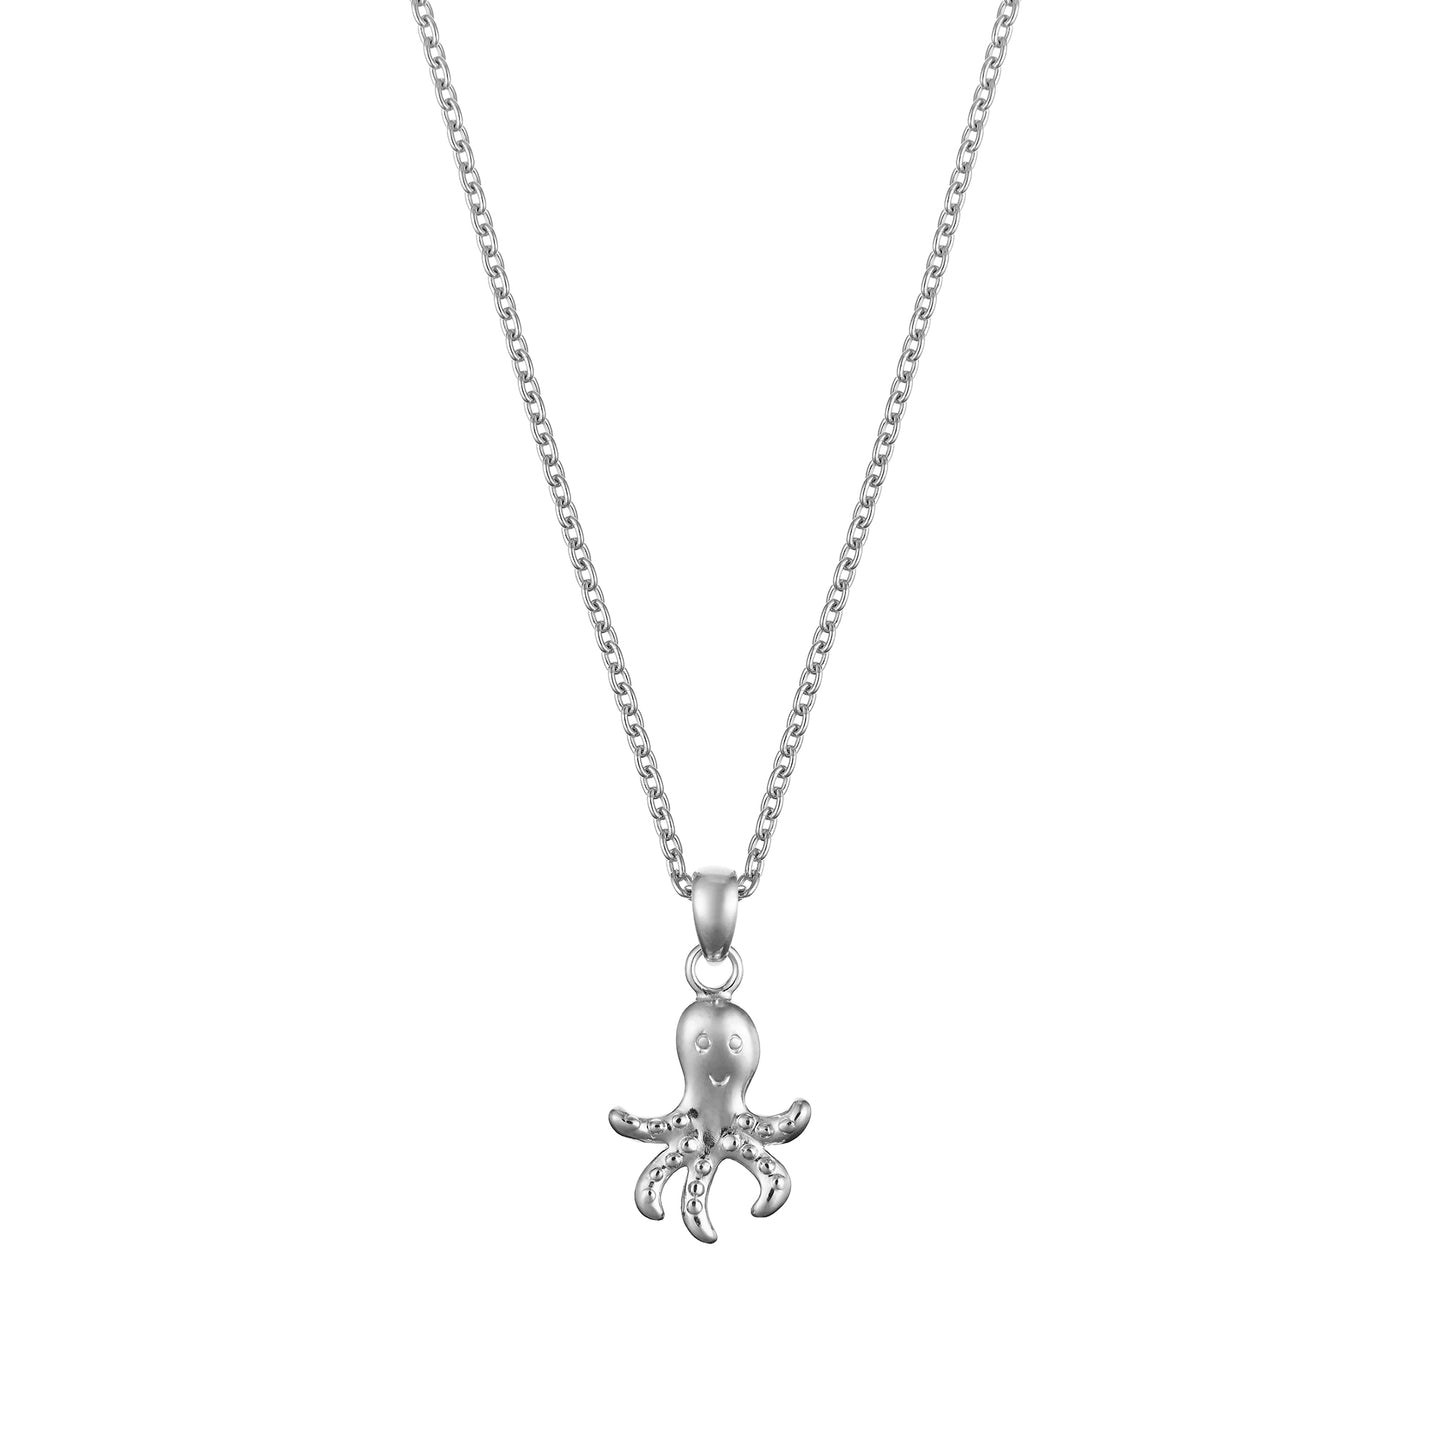 Children's Sterling Silver Octopus with Smile Pendant on an Extendable Chain Necklace